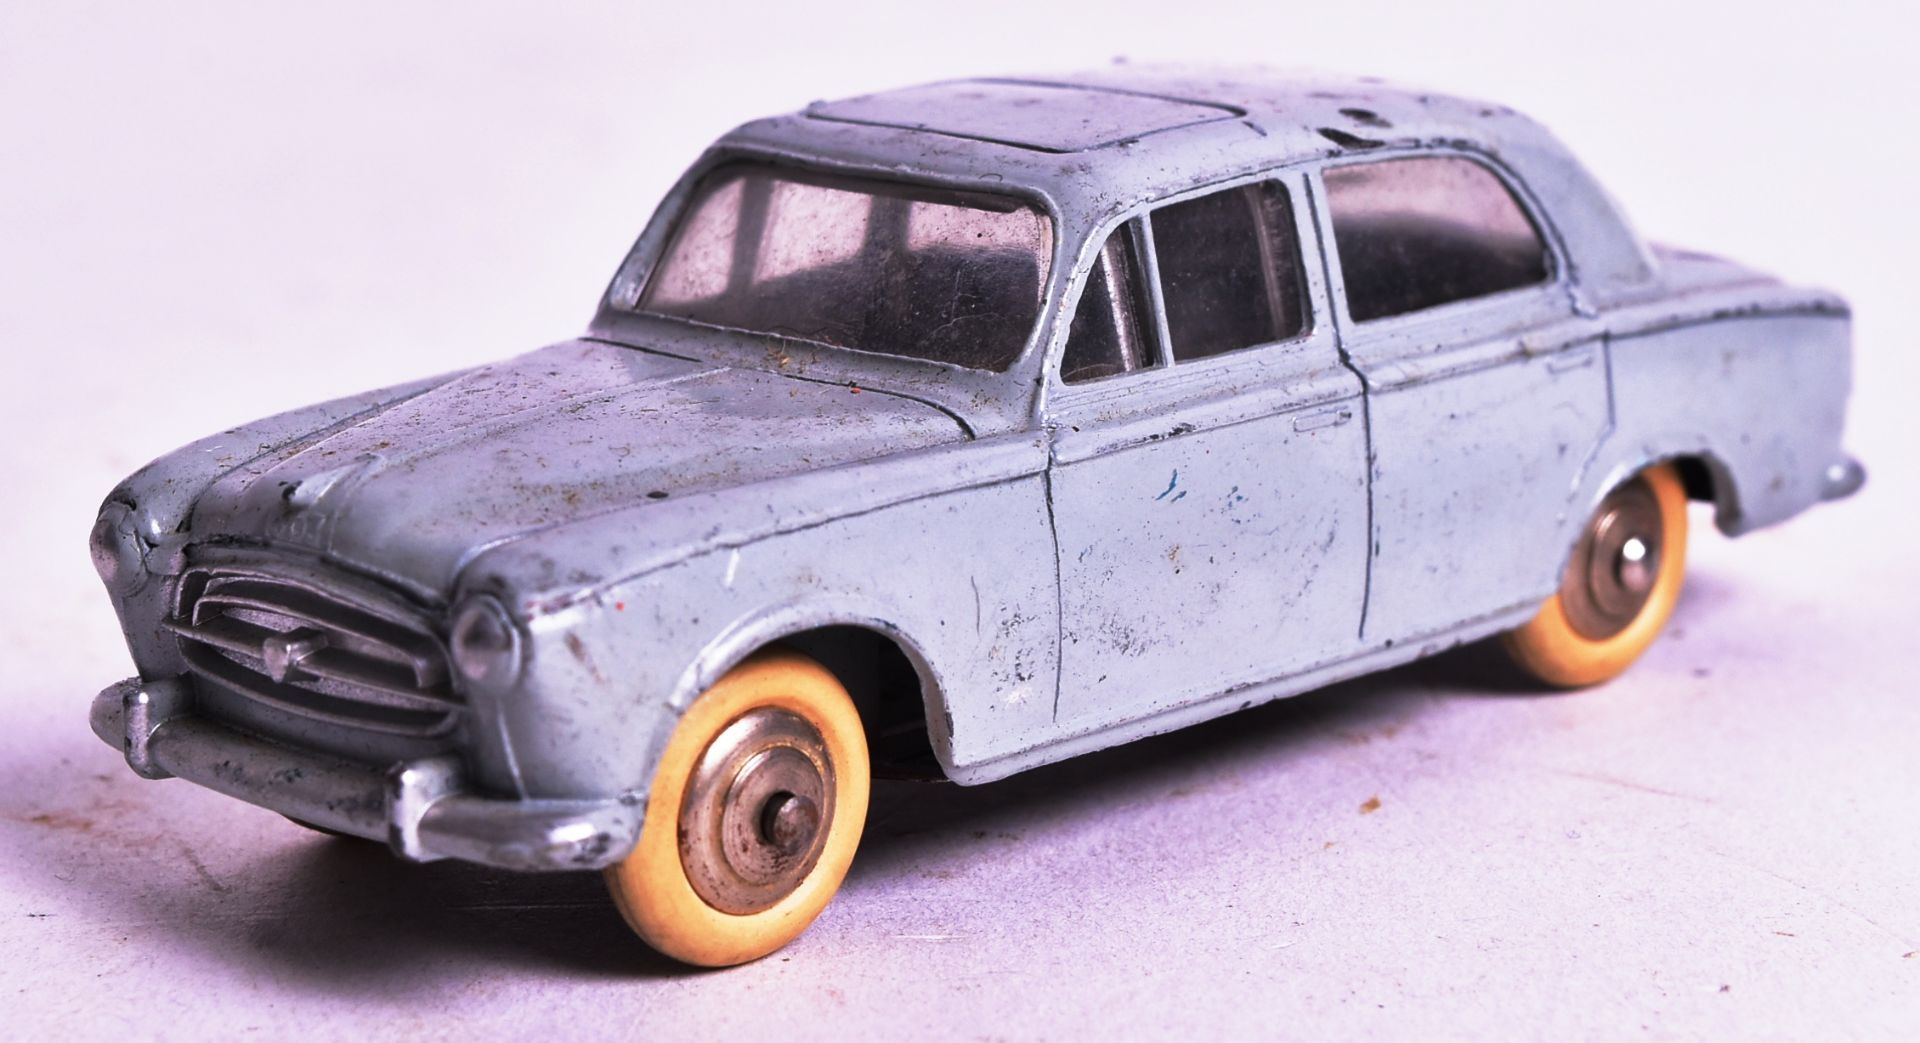 DIECAST - FRENCH DINKY TOYS - PEUGEOT 403 & CHEVROLET CORVAIR - Image 5 of 6